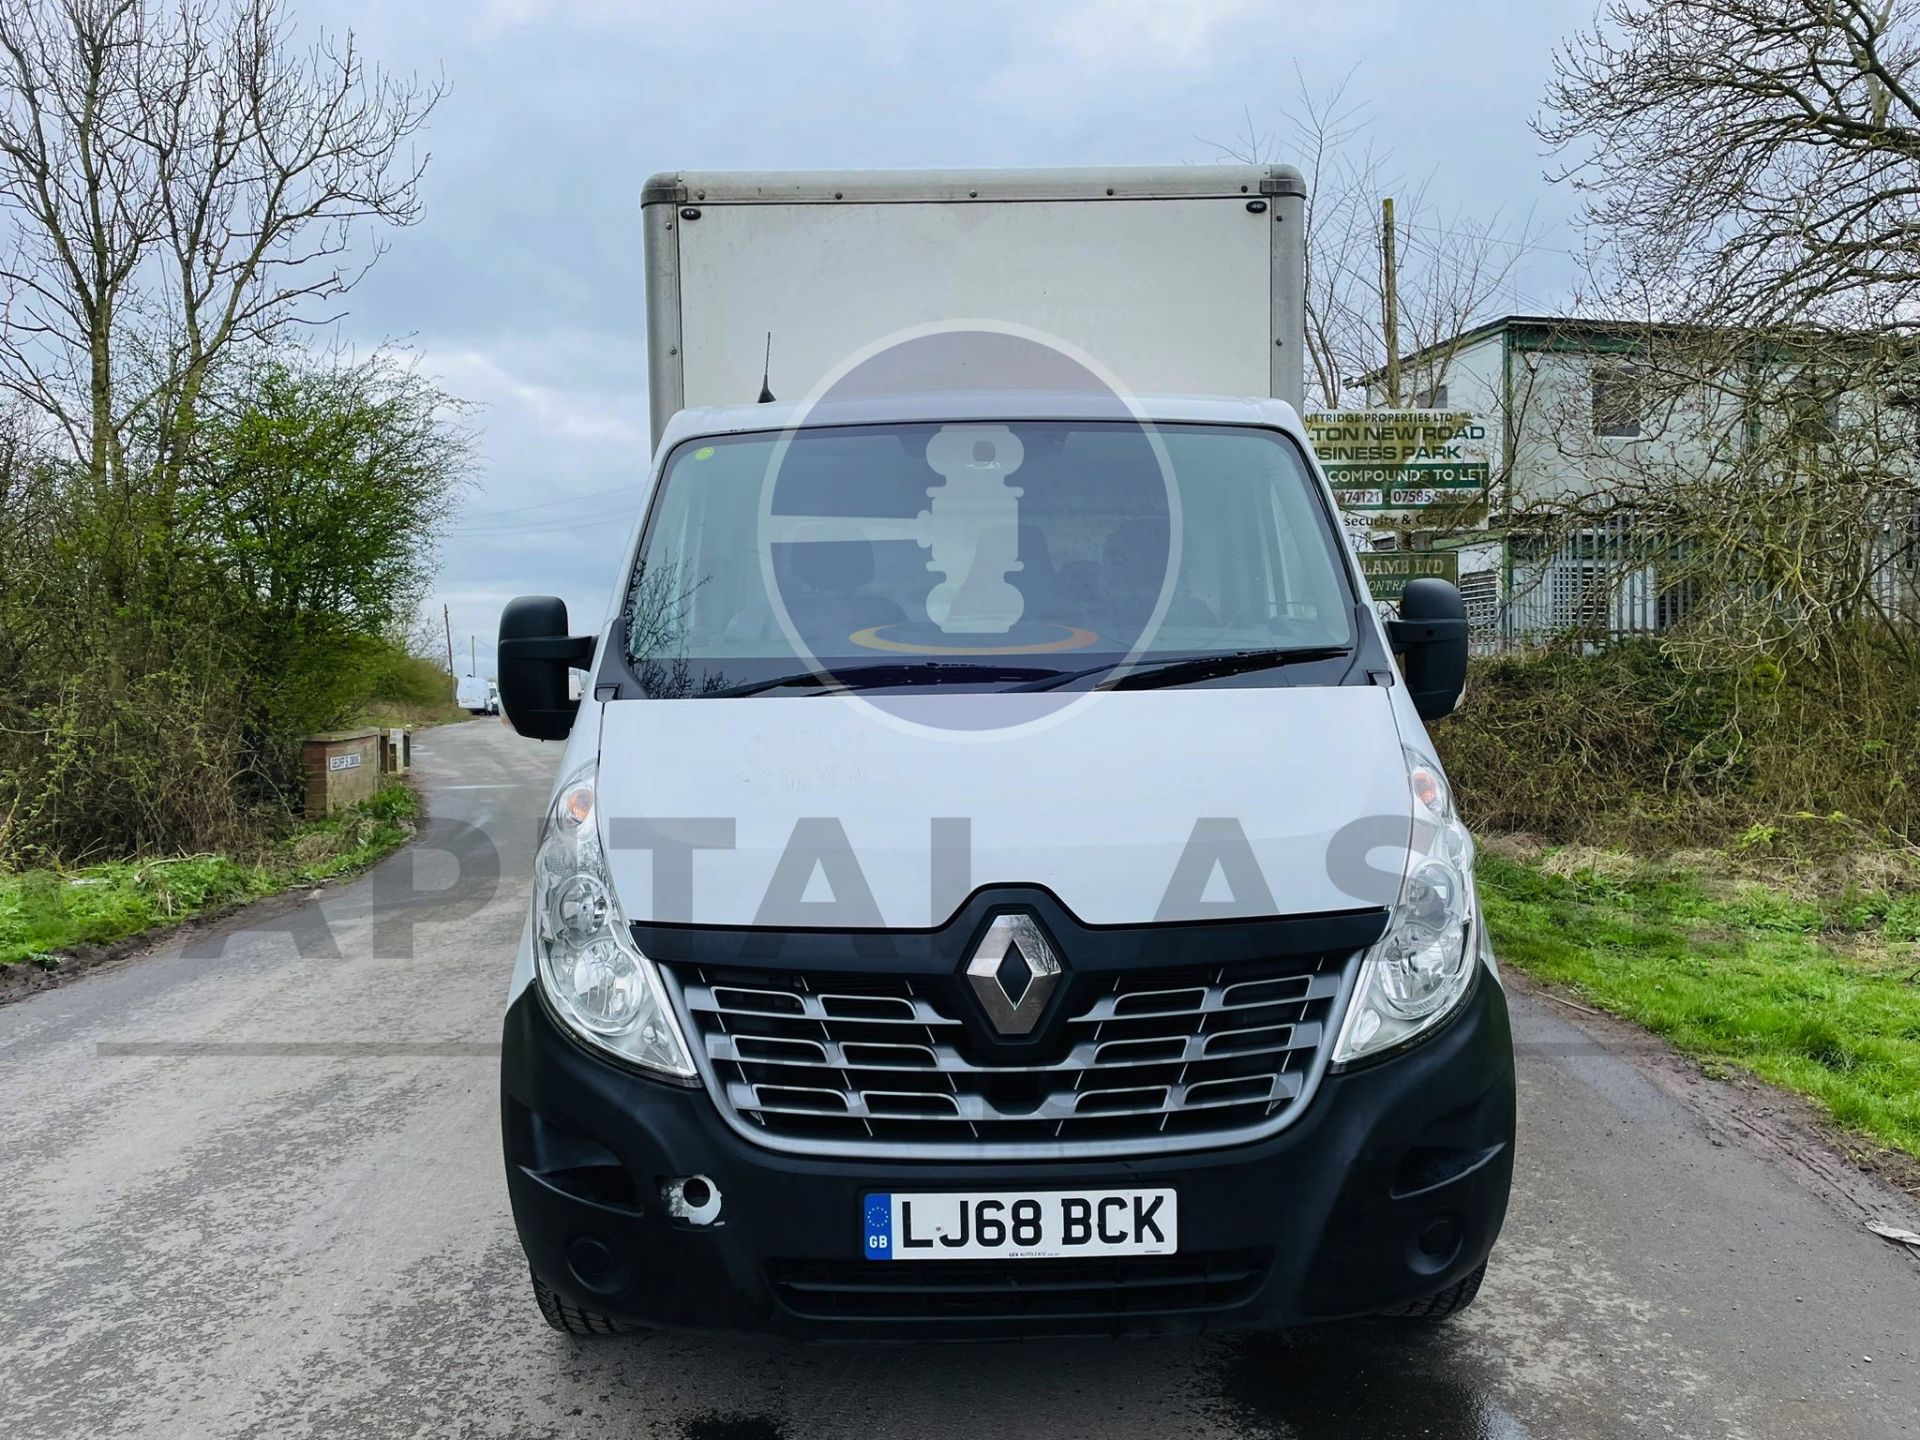 RENAULT MASTER 2.3 DCI 130 BUSINESS EDITION LWB (LUTON / BOX VAN) - 2019 MODEL - EURO 6 - TAIL LIFT! - Image 3 of 19